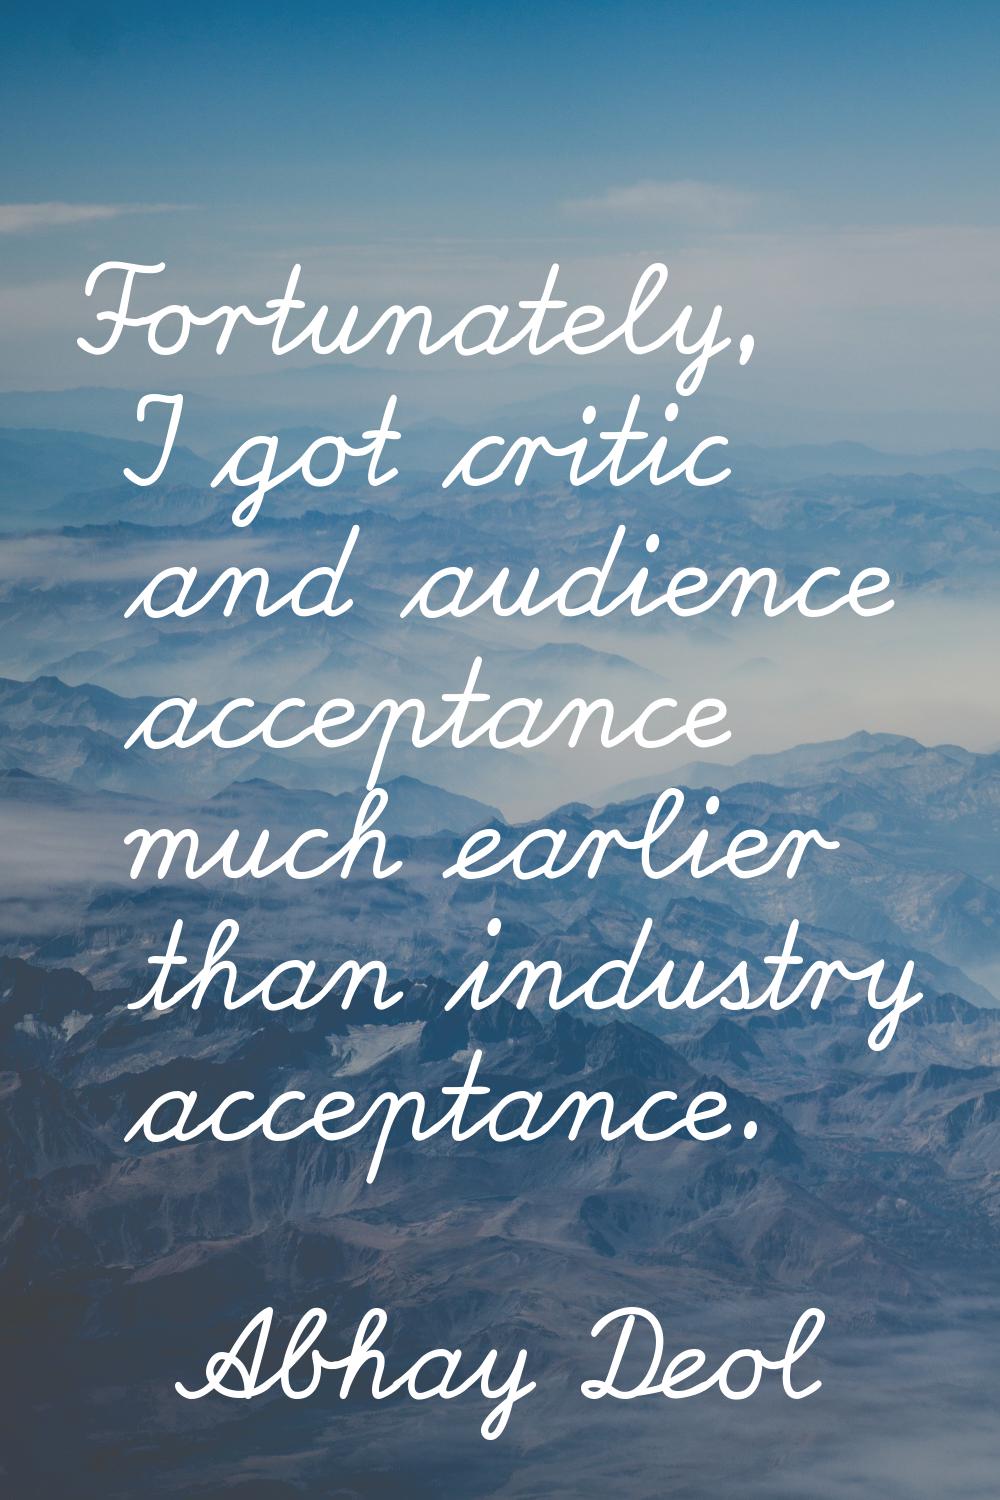 Fortunately, I got critic and audience acceptance much earlier than industry acceptance.